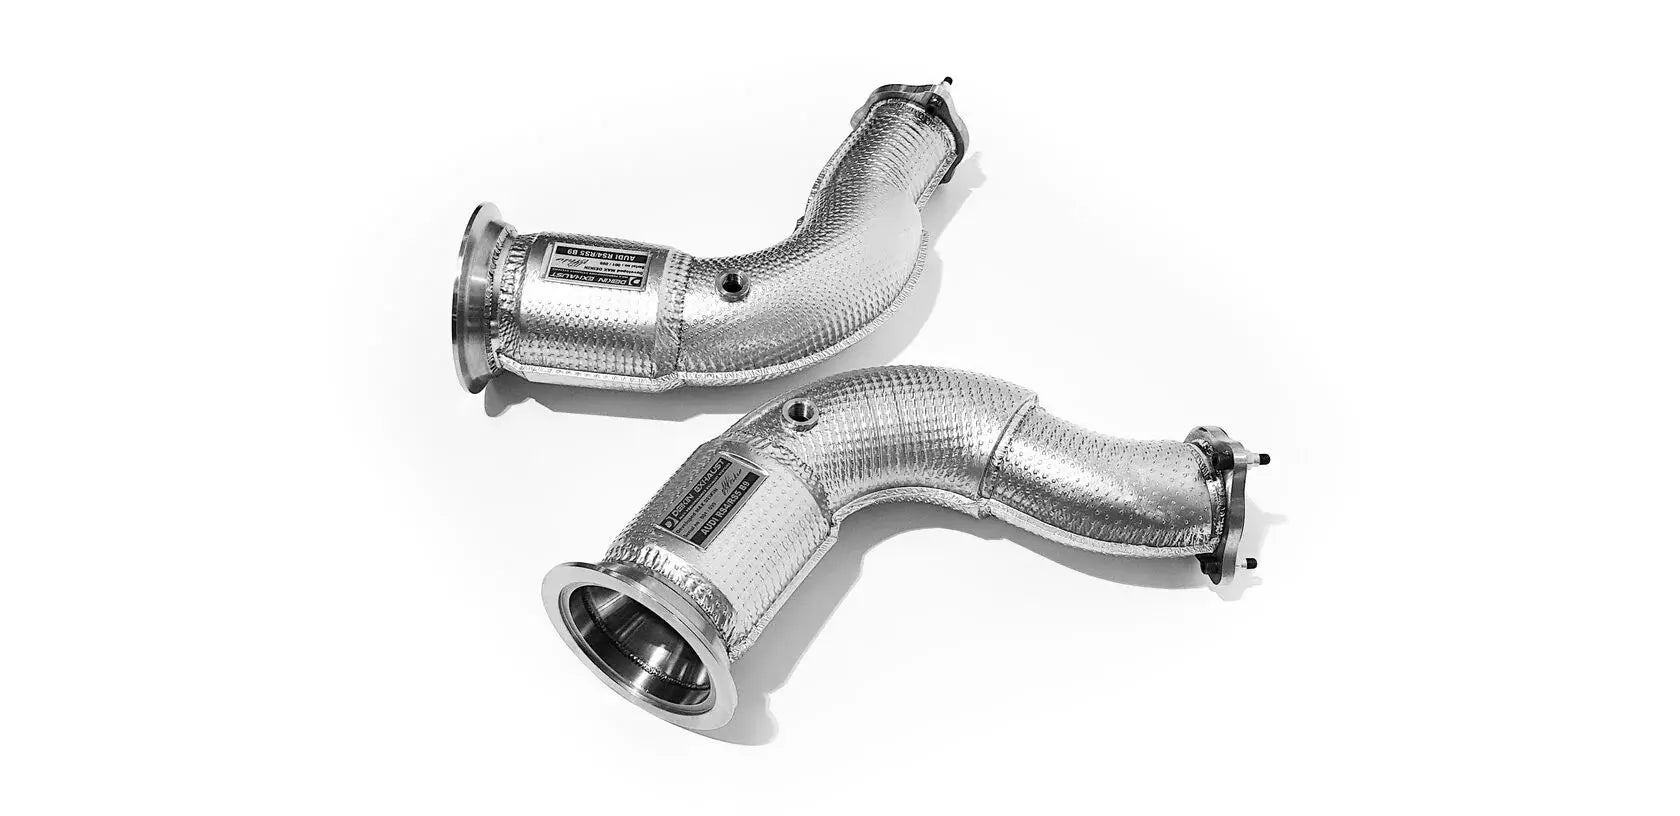 DEIKIN 10-AUDI.RS5.B9-DPT Downpipe for AUDI RS5 (B9) with thermal insulation HeatShield Photo-2 